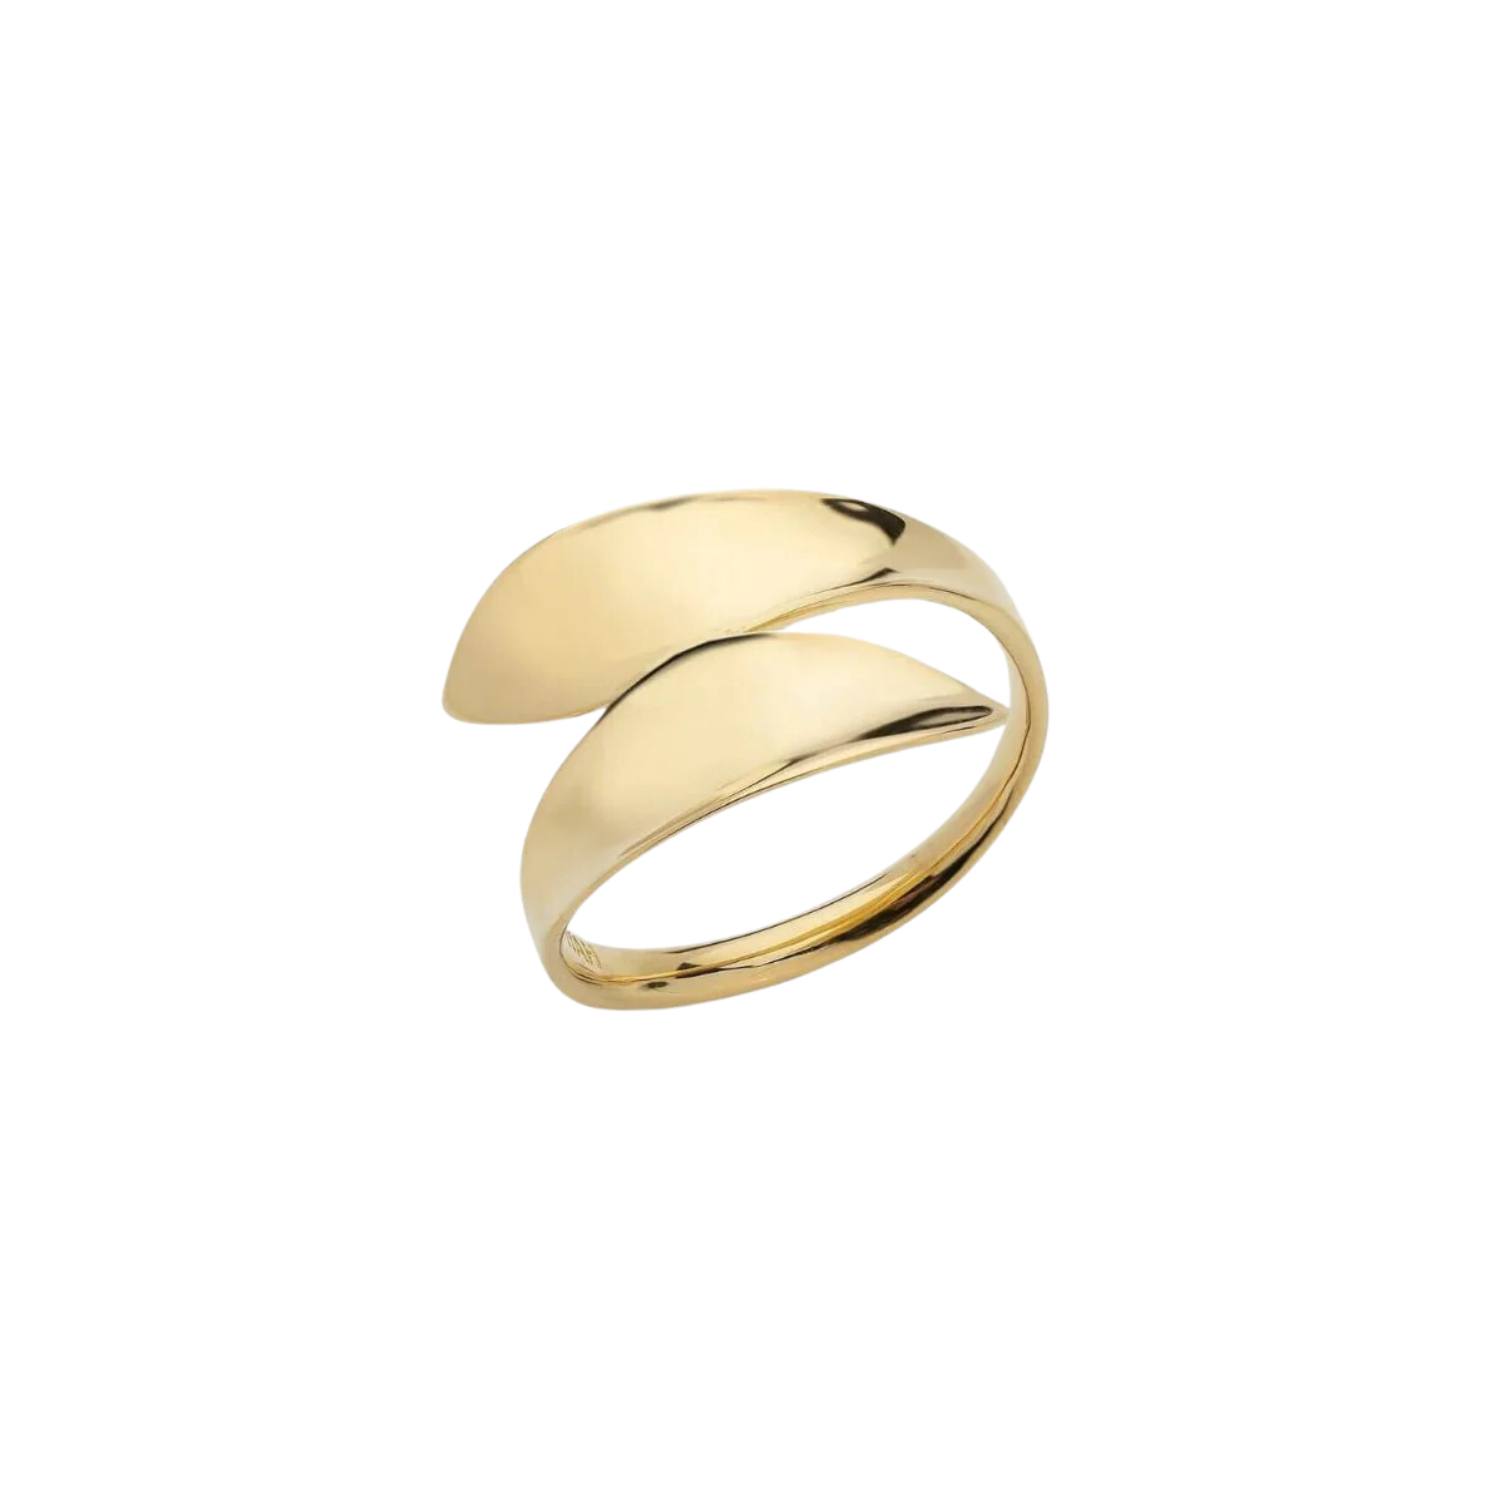 Women’s Adjustable Wave Ring Gold Fiyah Jewellery